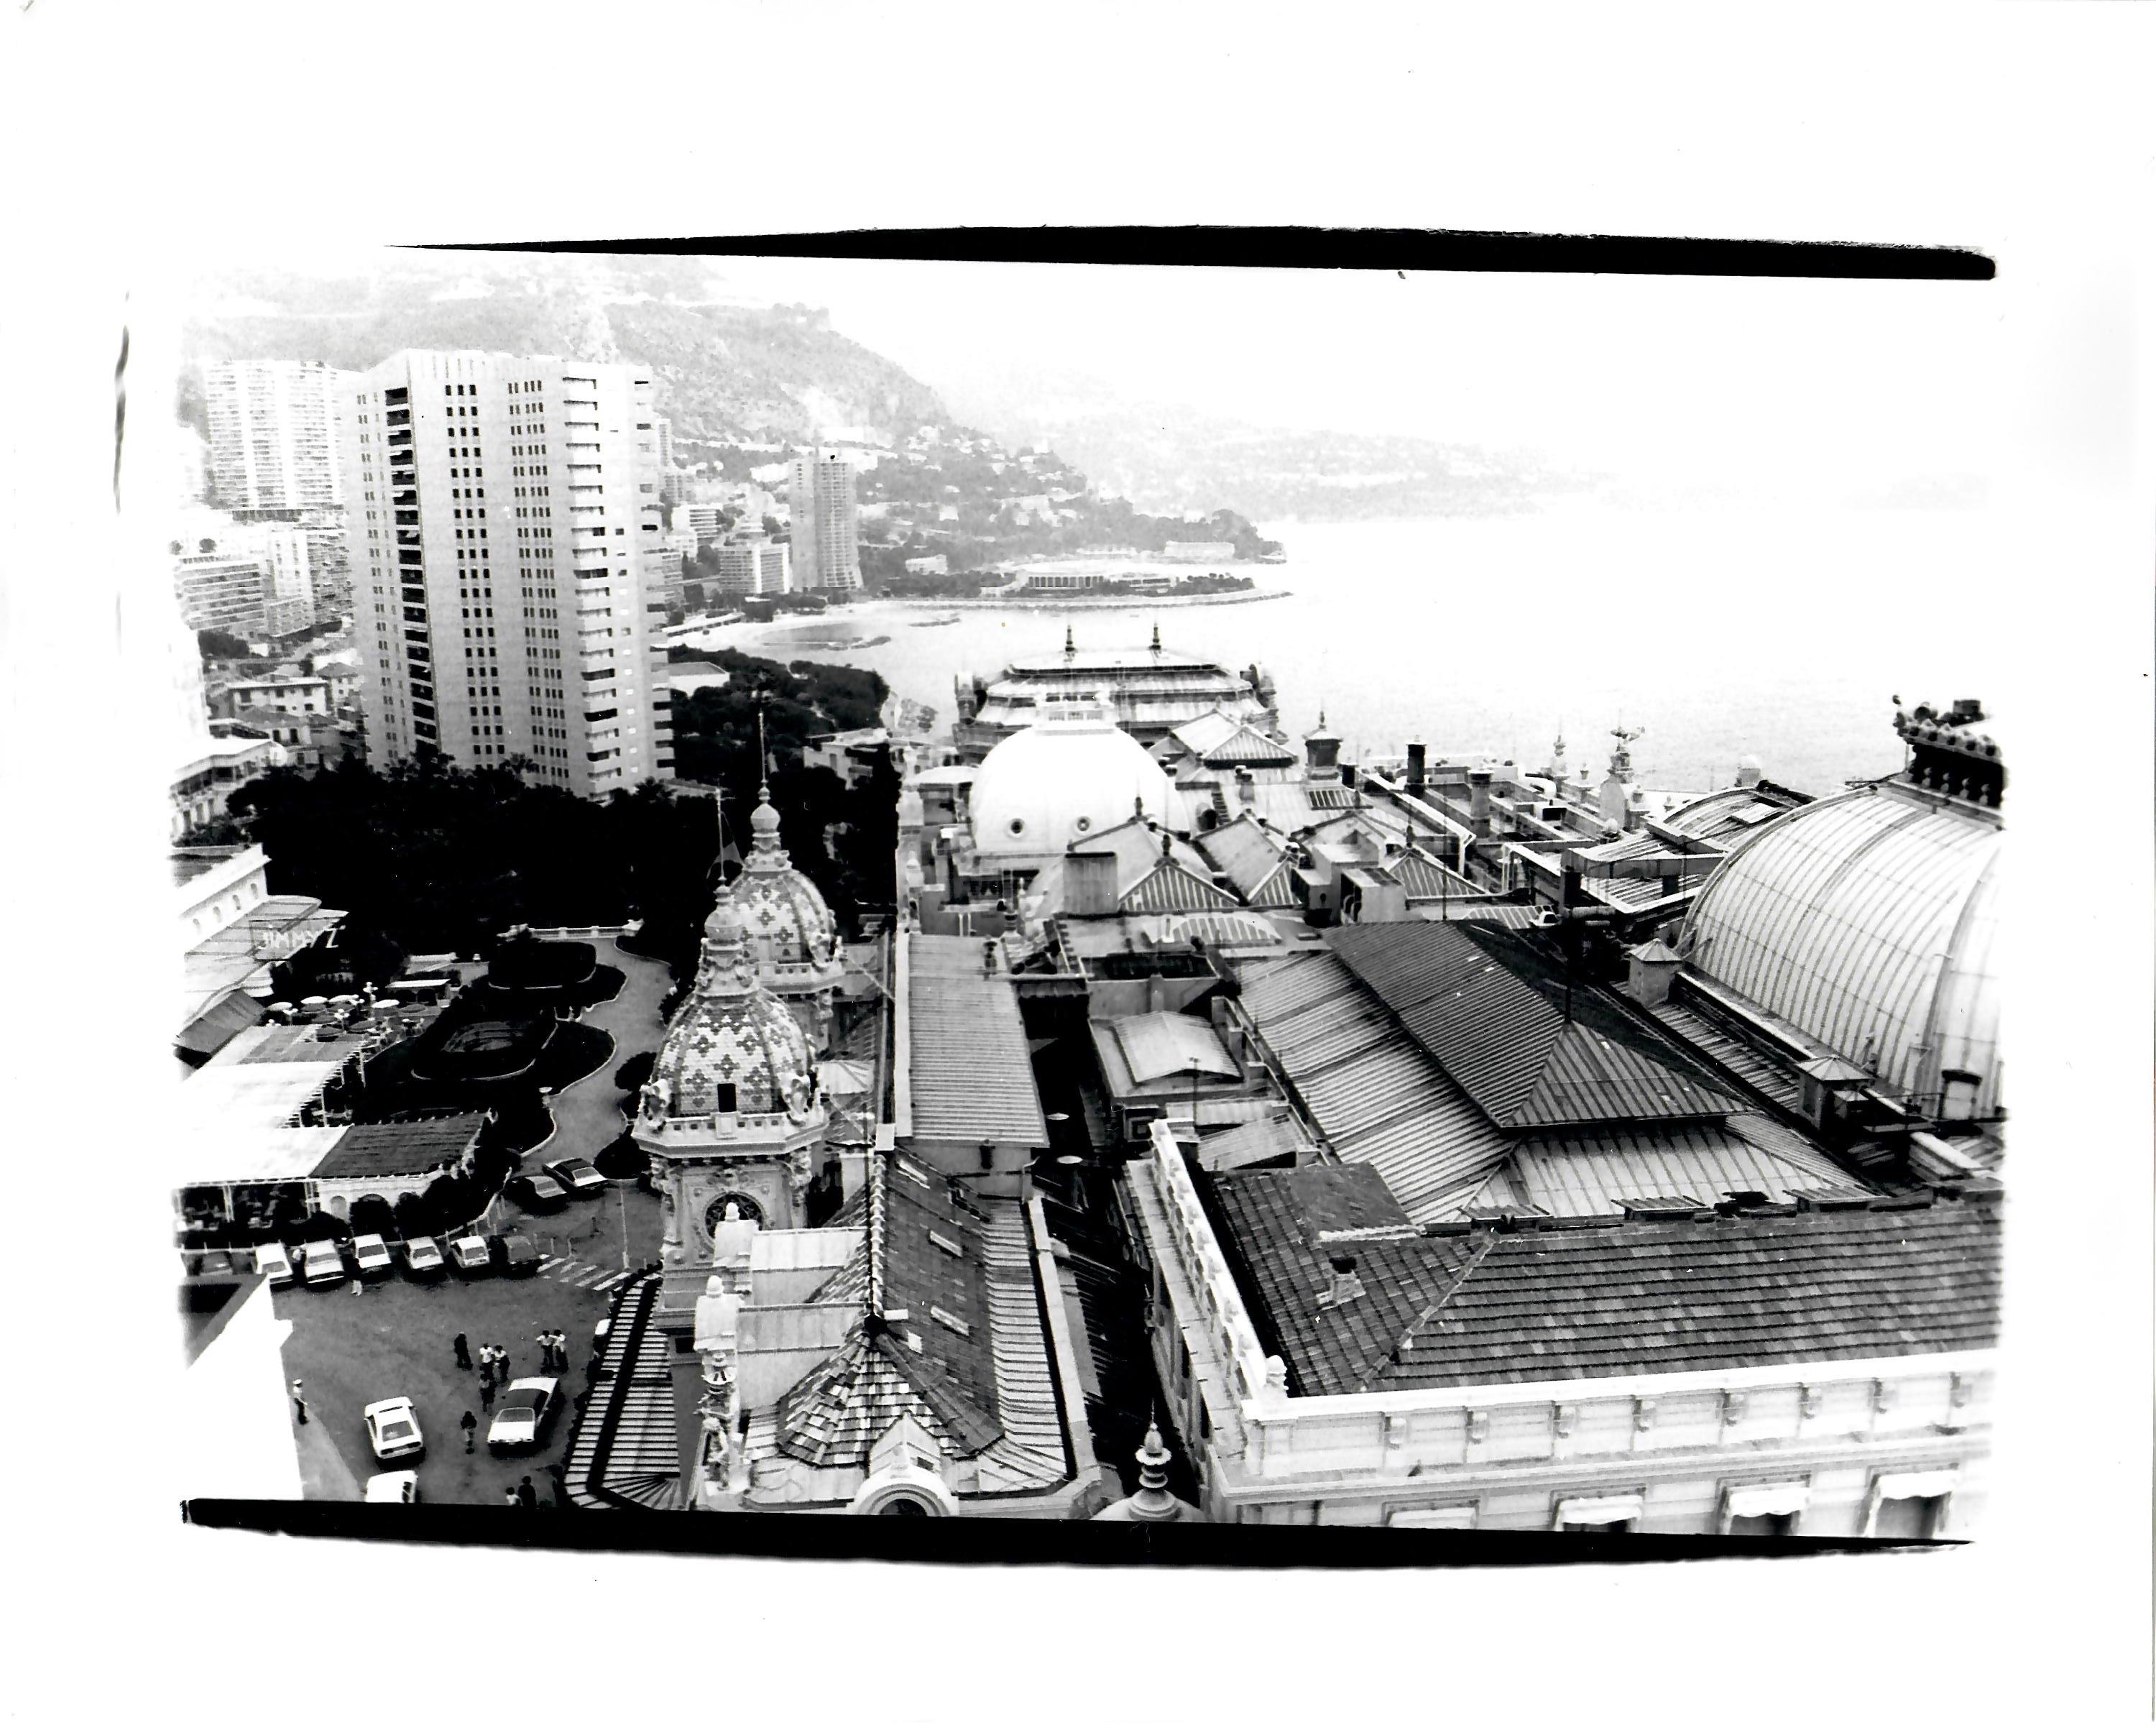 Andy Warhol Landscape Photograph - View of Monte Carlo